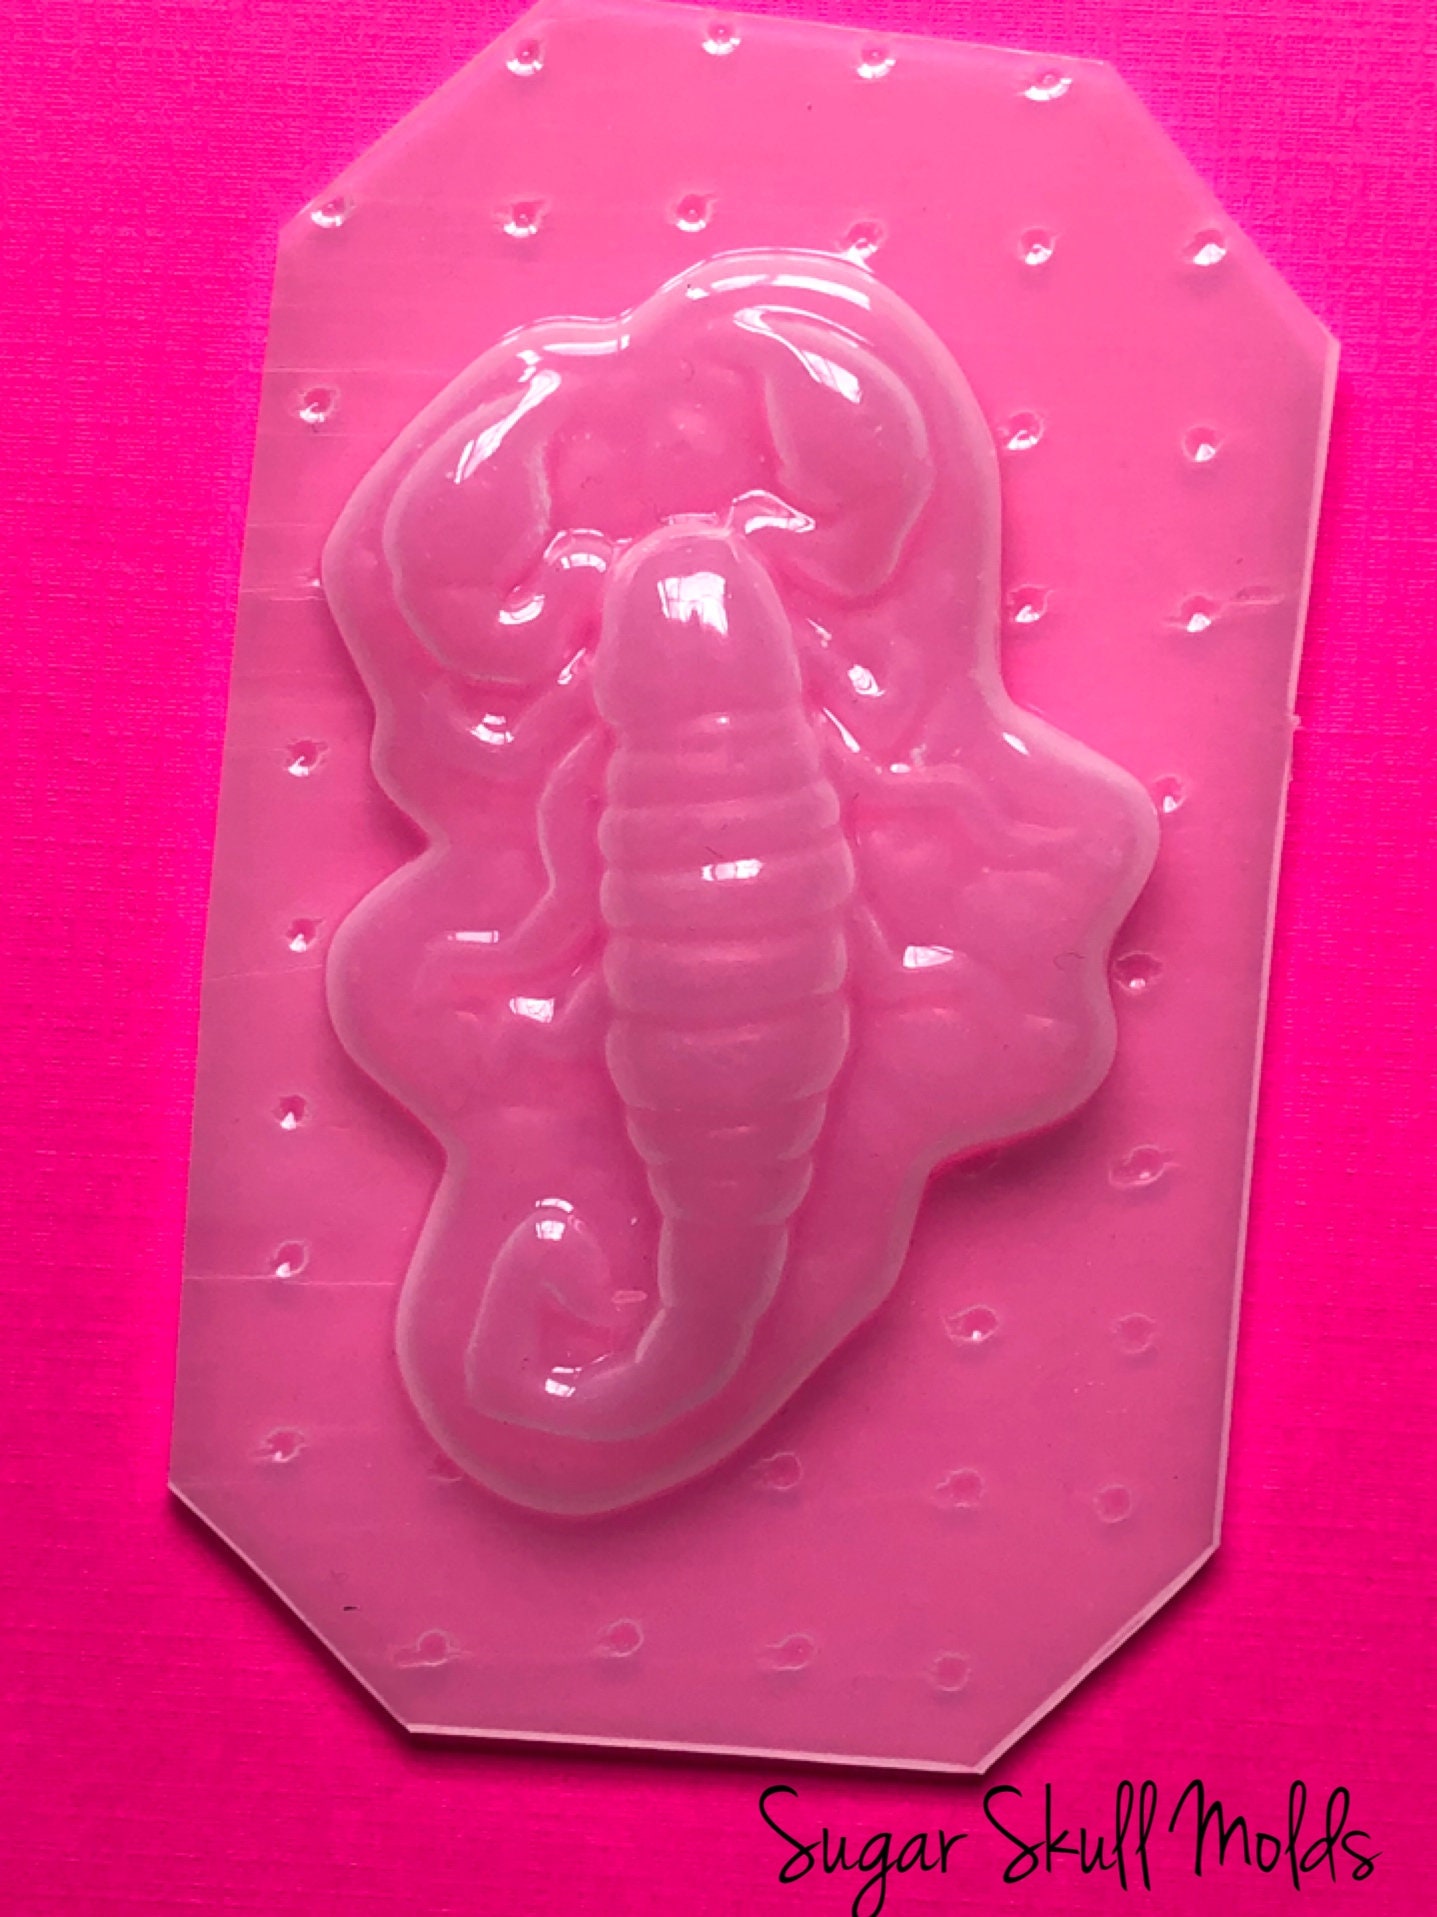 LARGE Dinosaurs Silicone Soap Mold 6 Cavities Dinosaurs Soap Mold Silicone  Molds Plaster Mold Ice Mold Chocolate Mold 